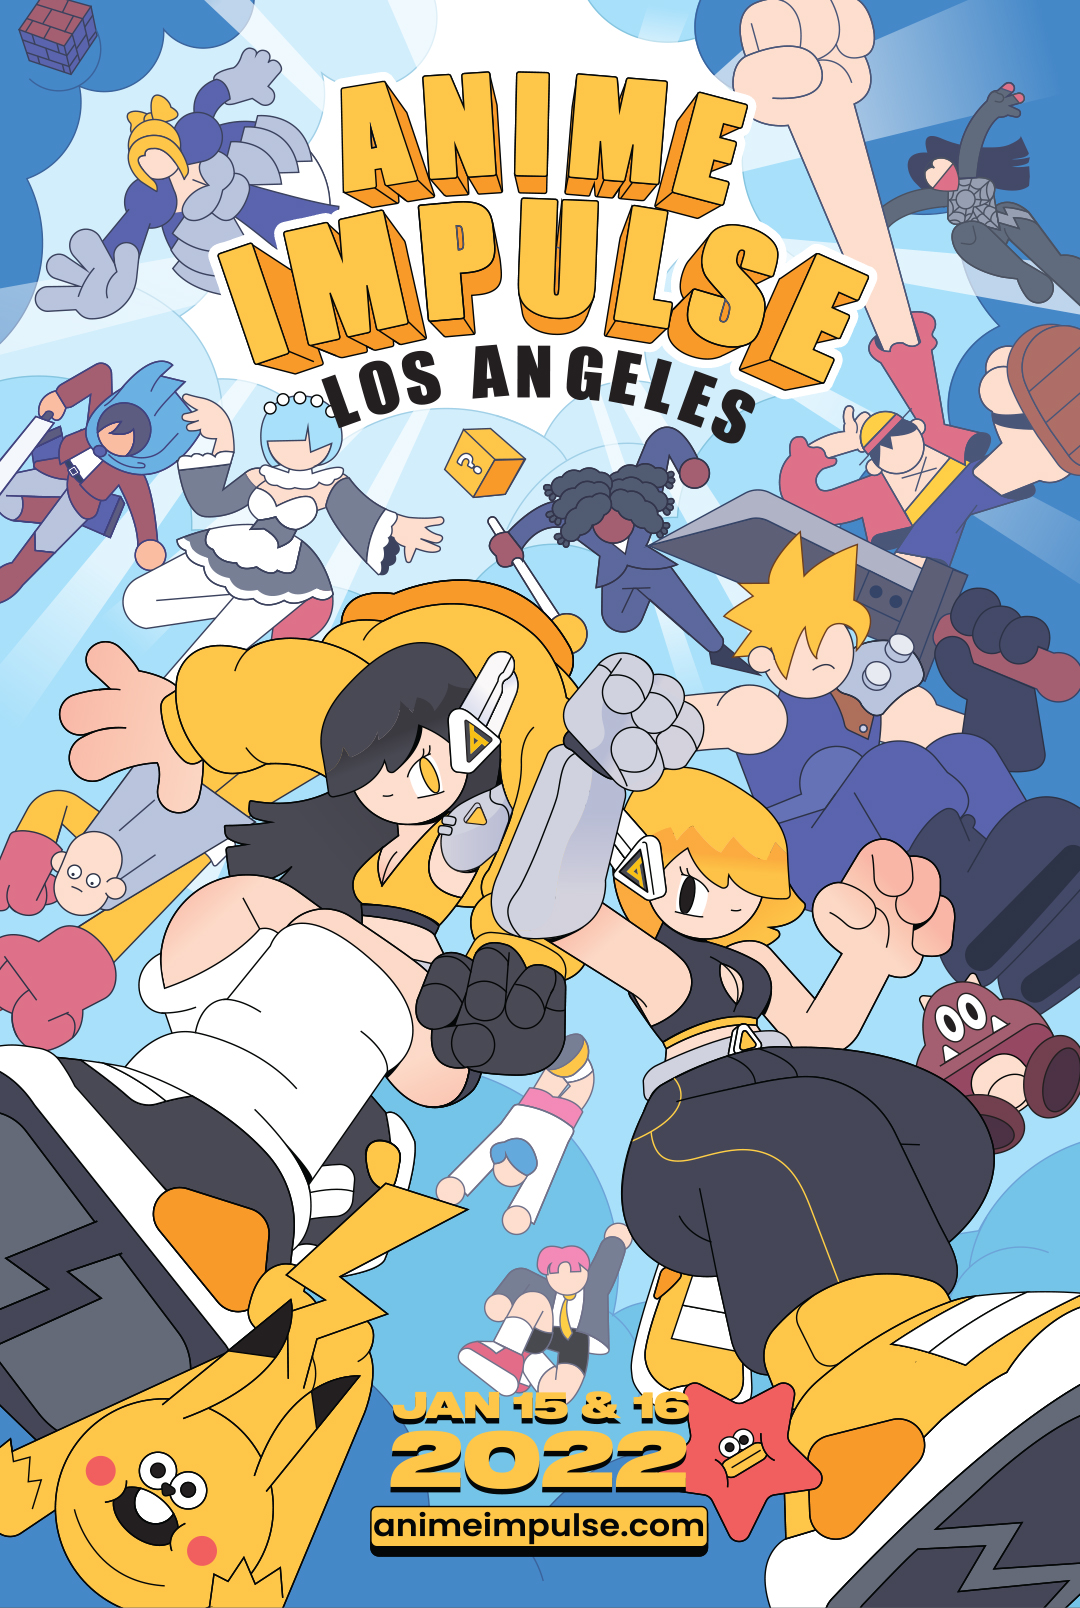 Anime Expo 2022From Panty  Stocking Trigun to Solo Leveling Heres what  you missed  GamerBraves